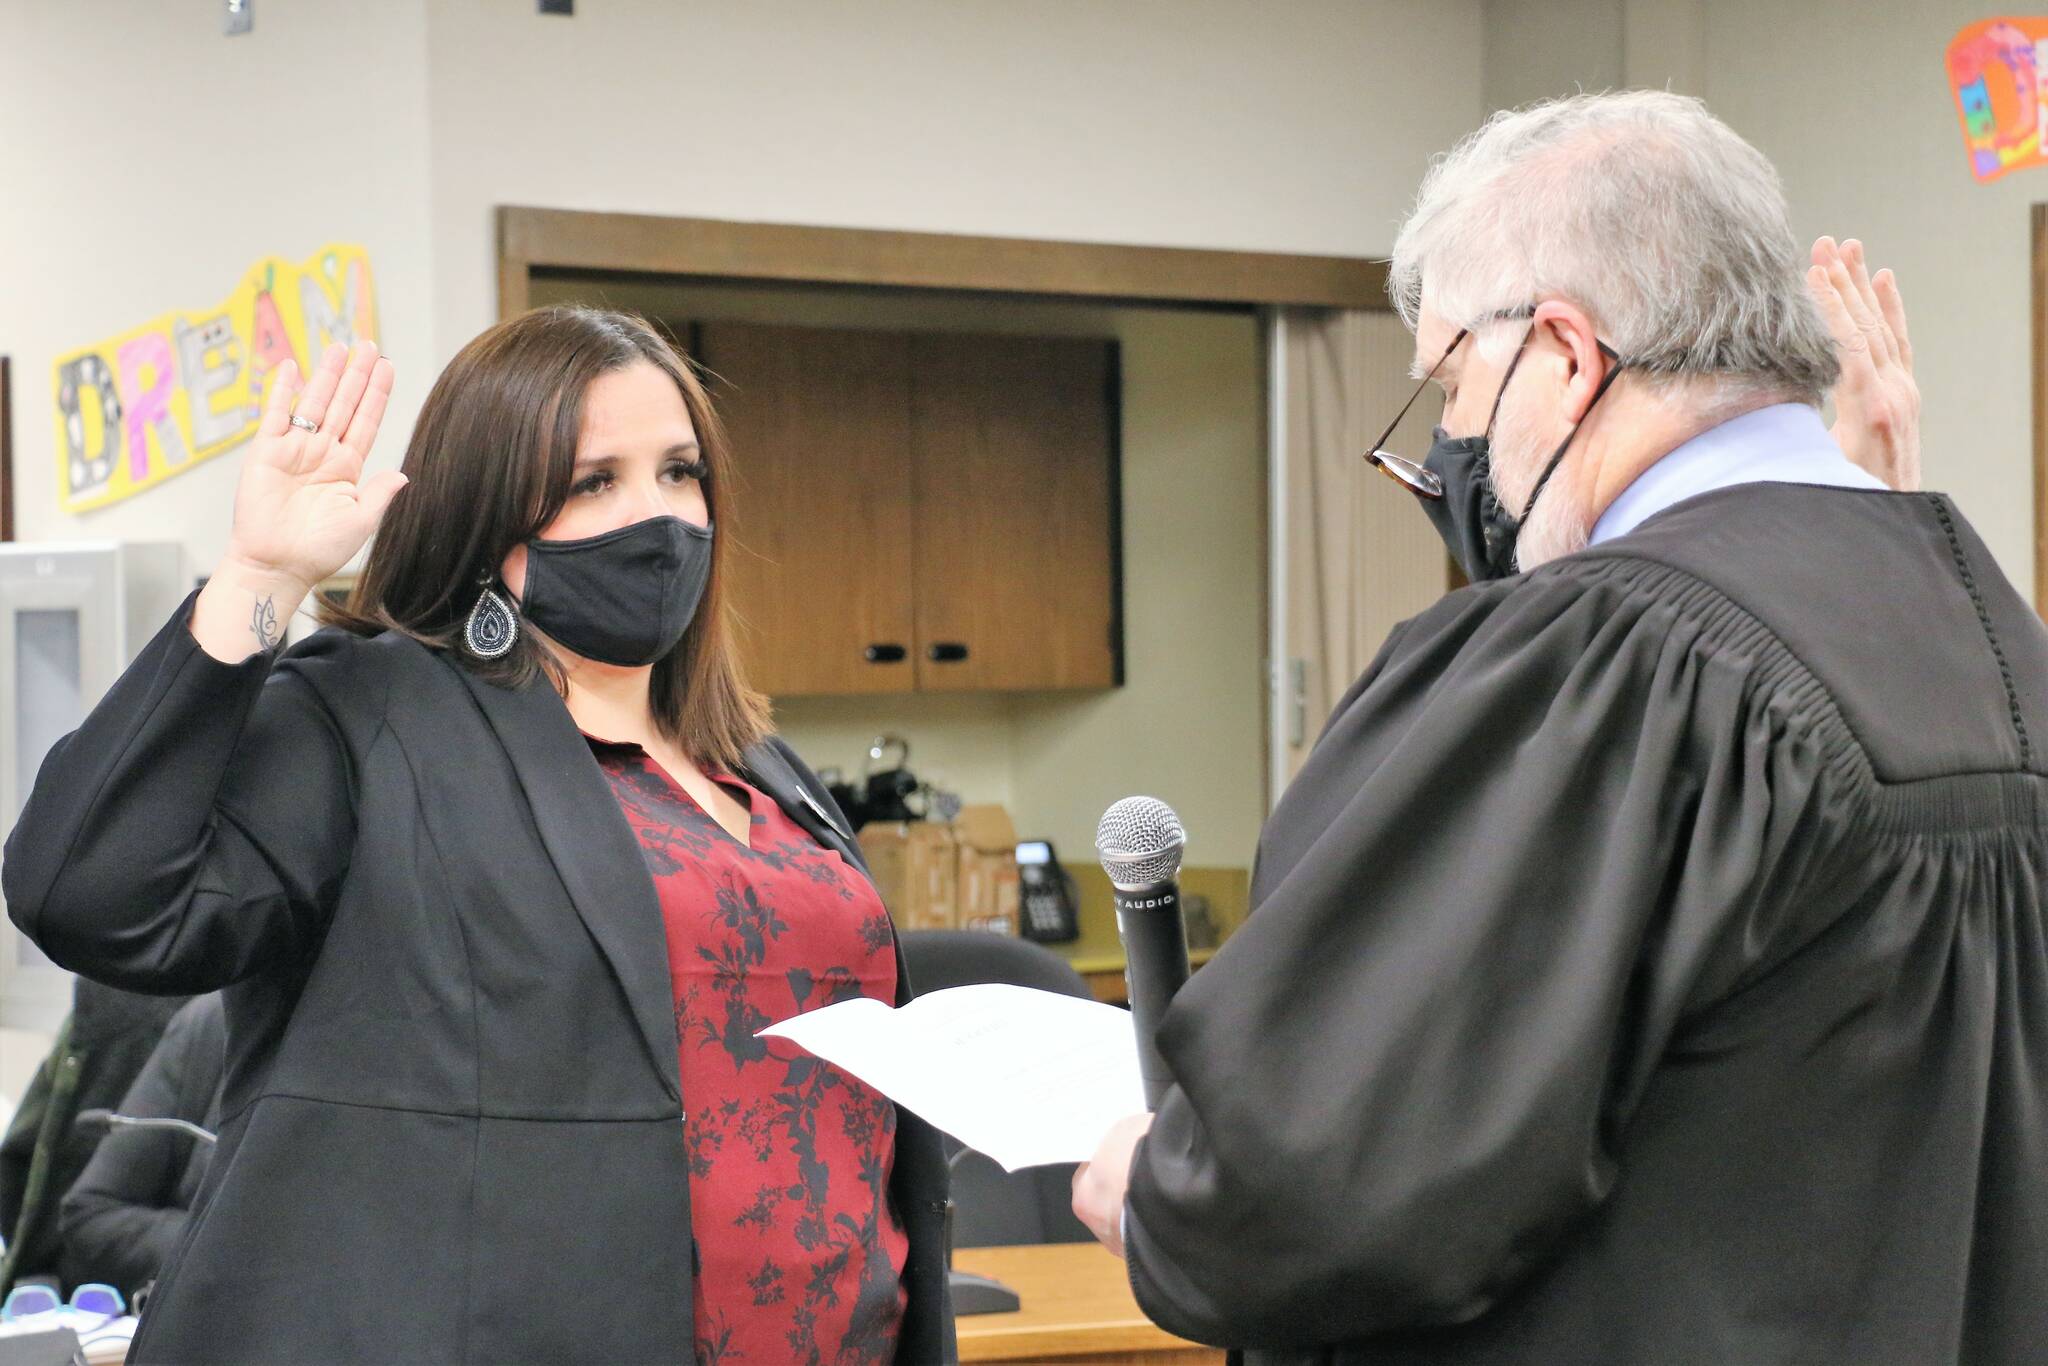 Photo Courtesy of the Auburn School District
Melissa Laramie holds up her right hand as she is sworn into the Auburn School Board by King County Superior Court Judge Matthew Williams on Dec. 13, 2021.